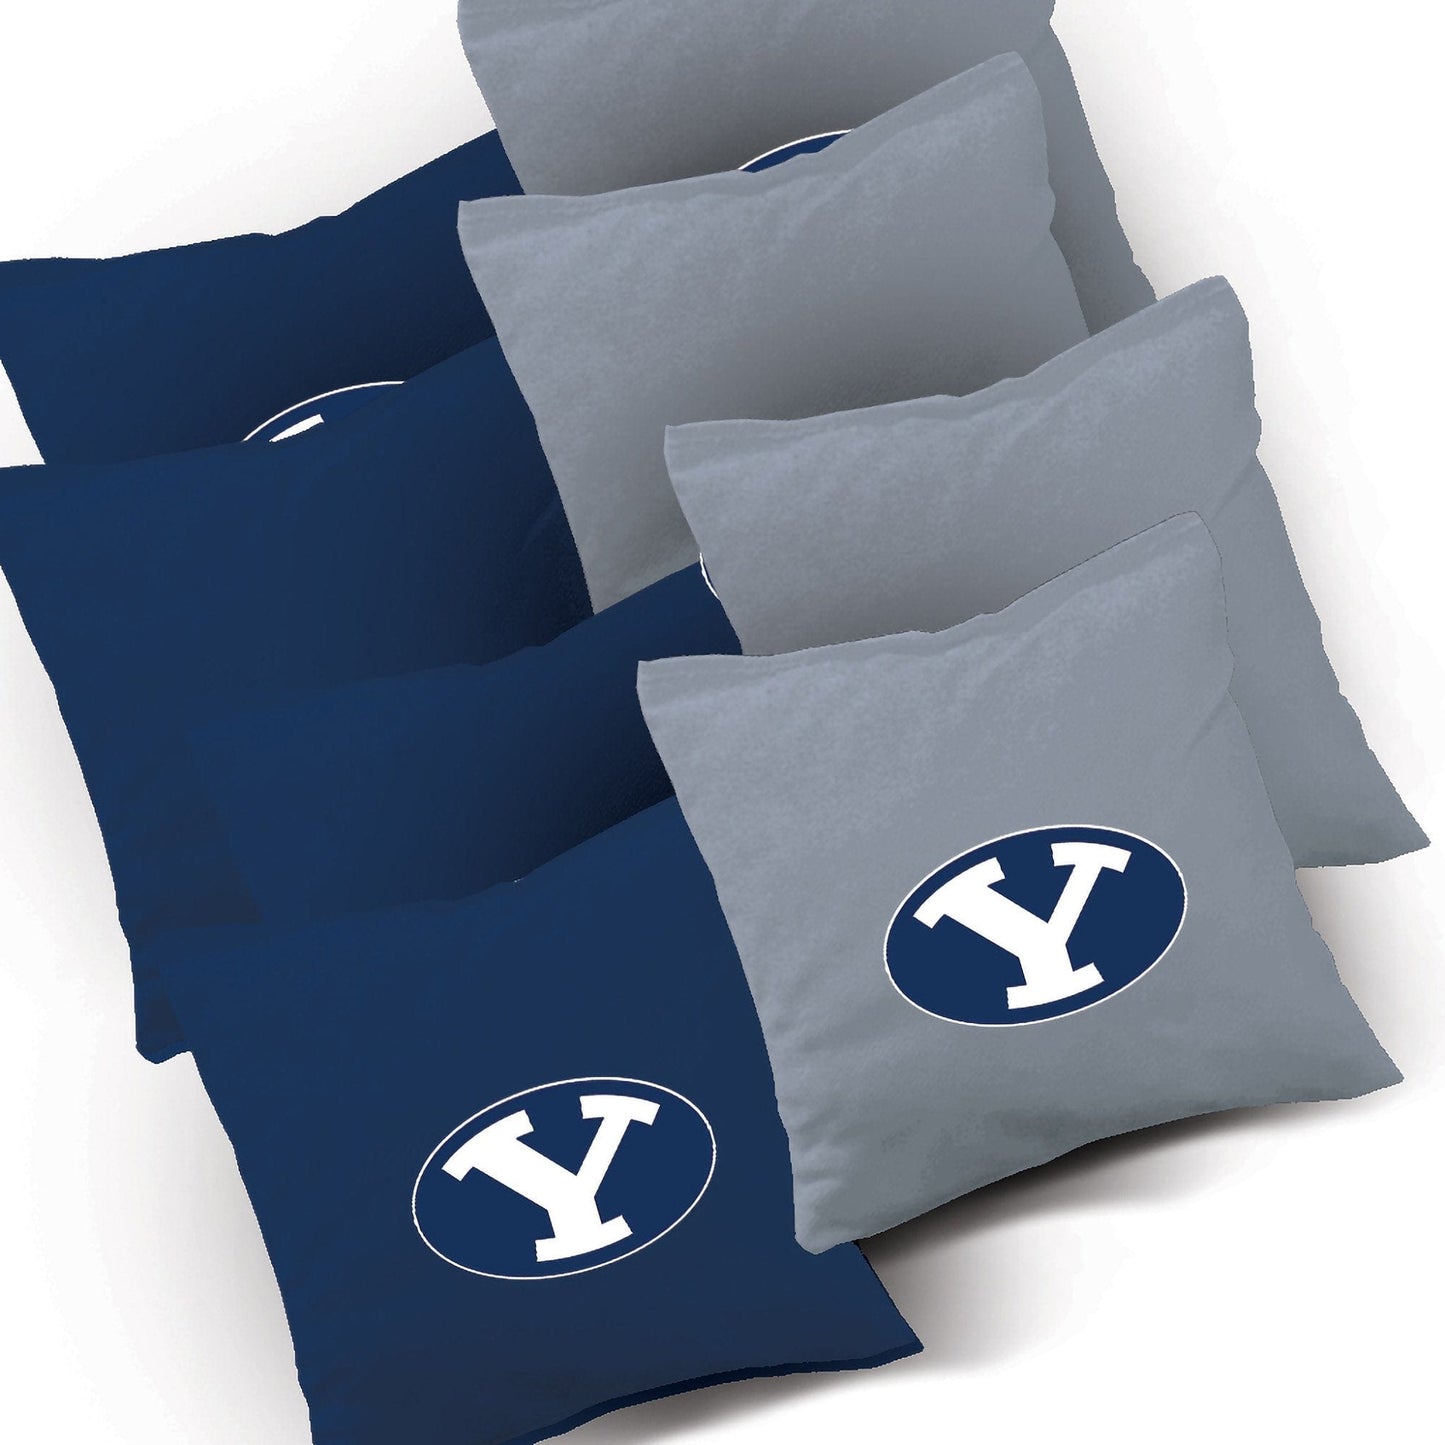 BYU Cougars Distressed team logo bags